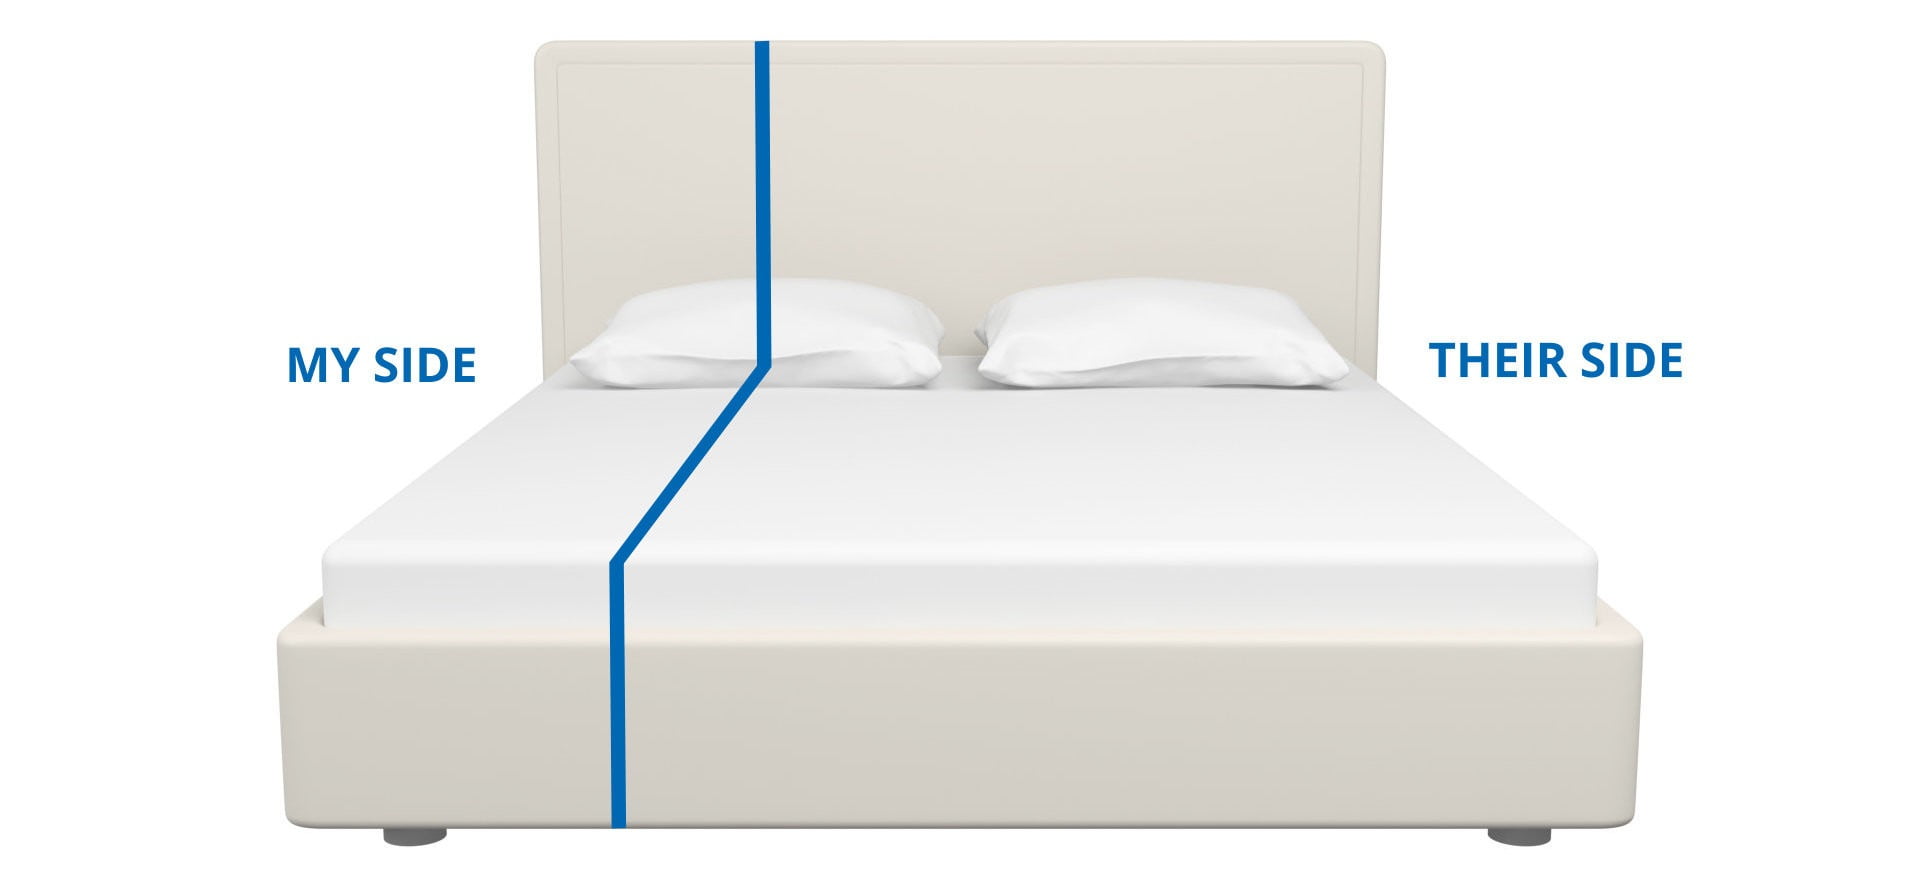 Bed Sizes Uk And Mattress Size, How Many Inches Is A King Size Bed Frame